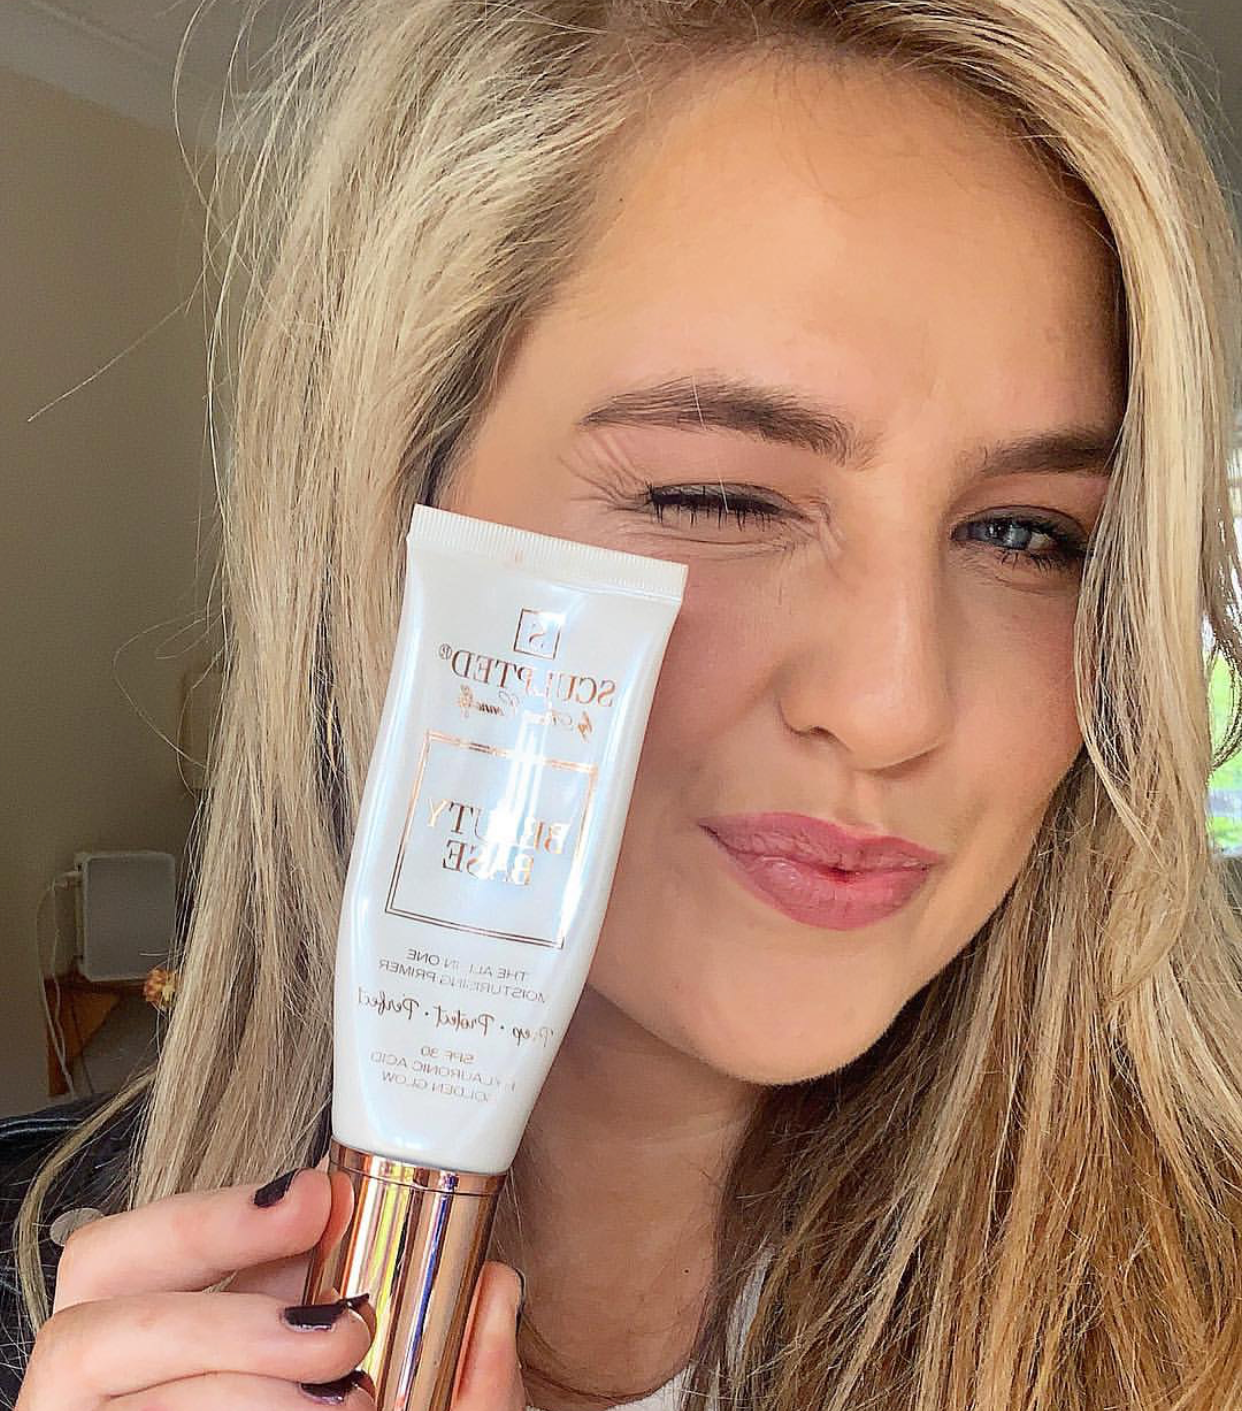 5 Bronzed Bombshell Products for Summer!